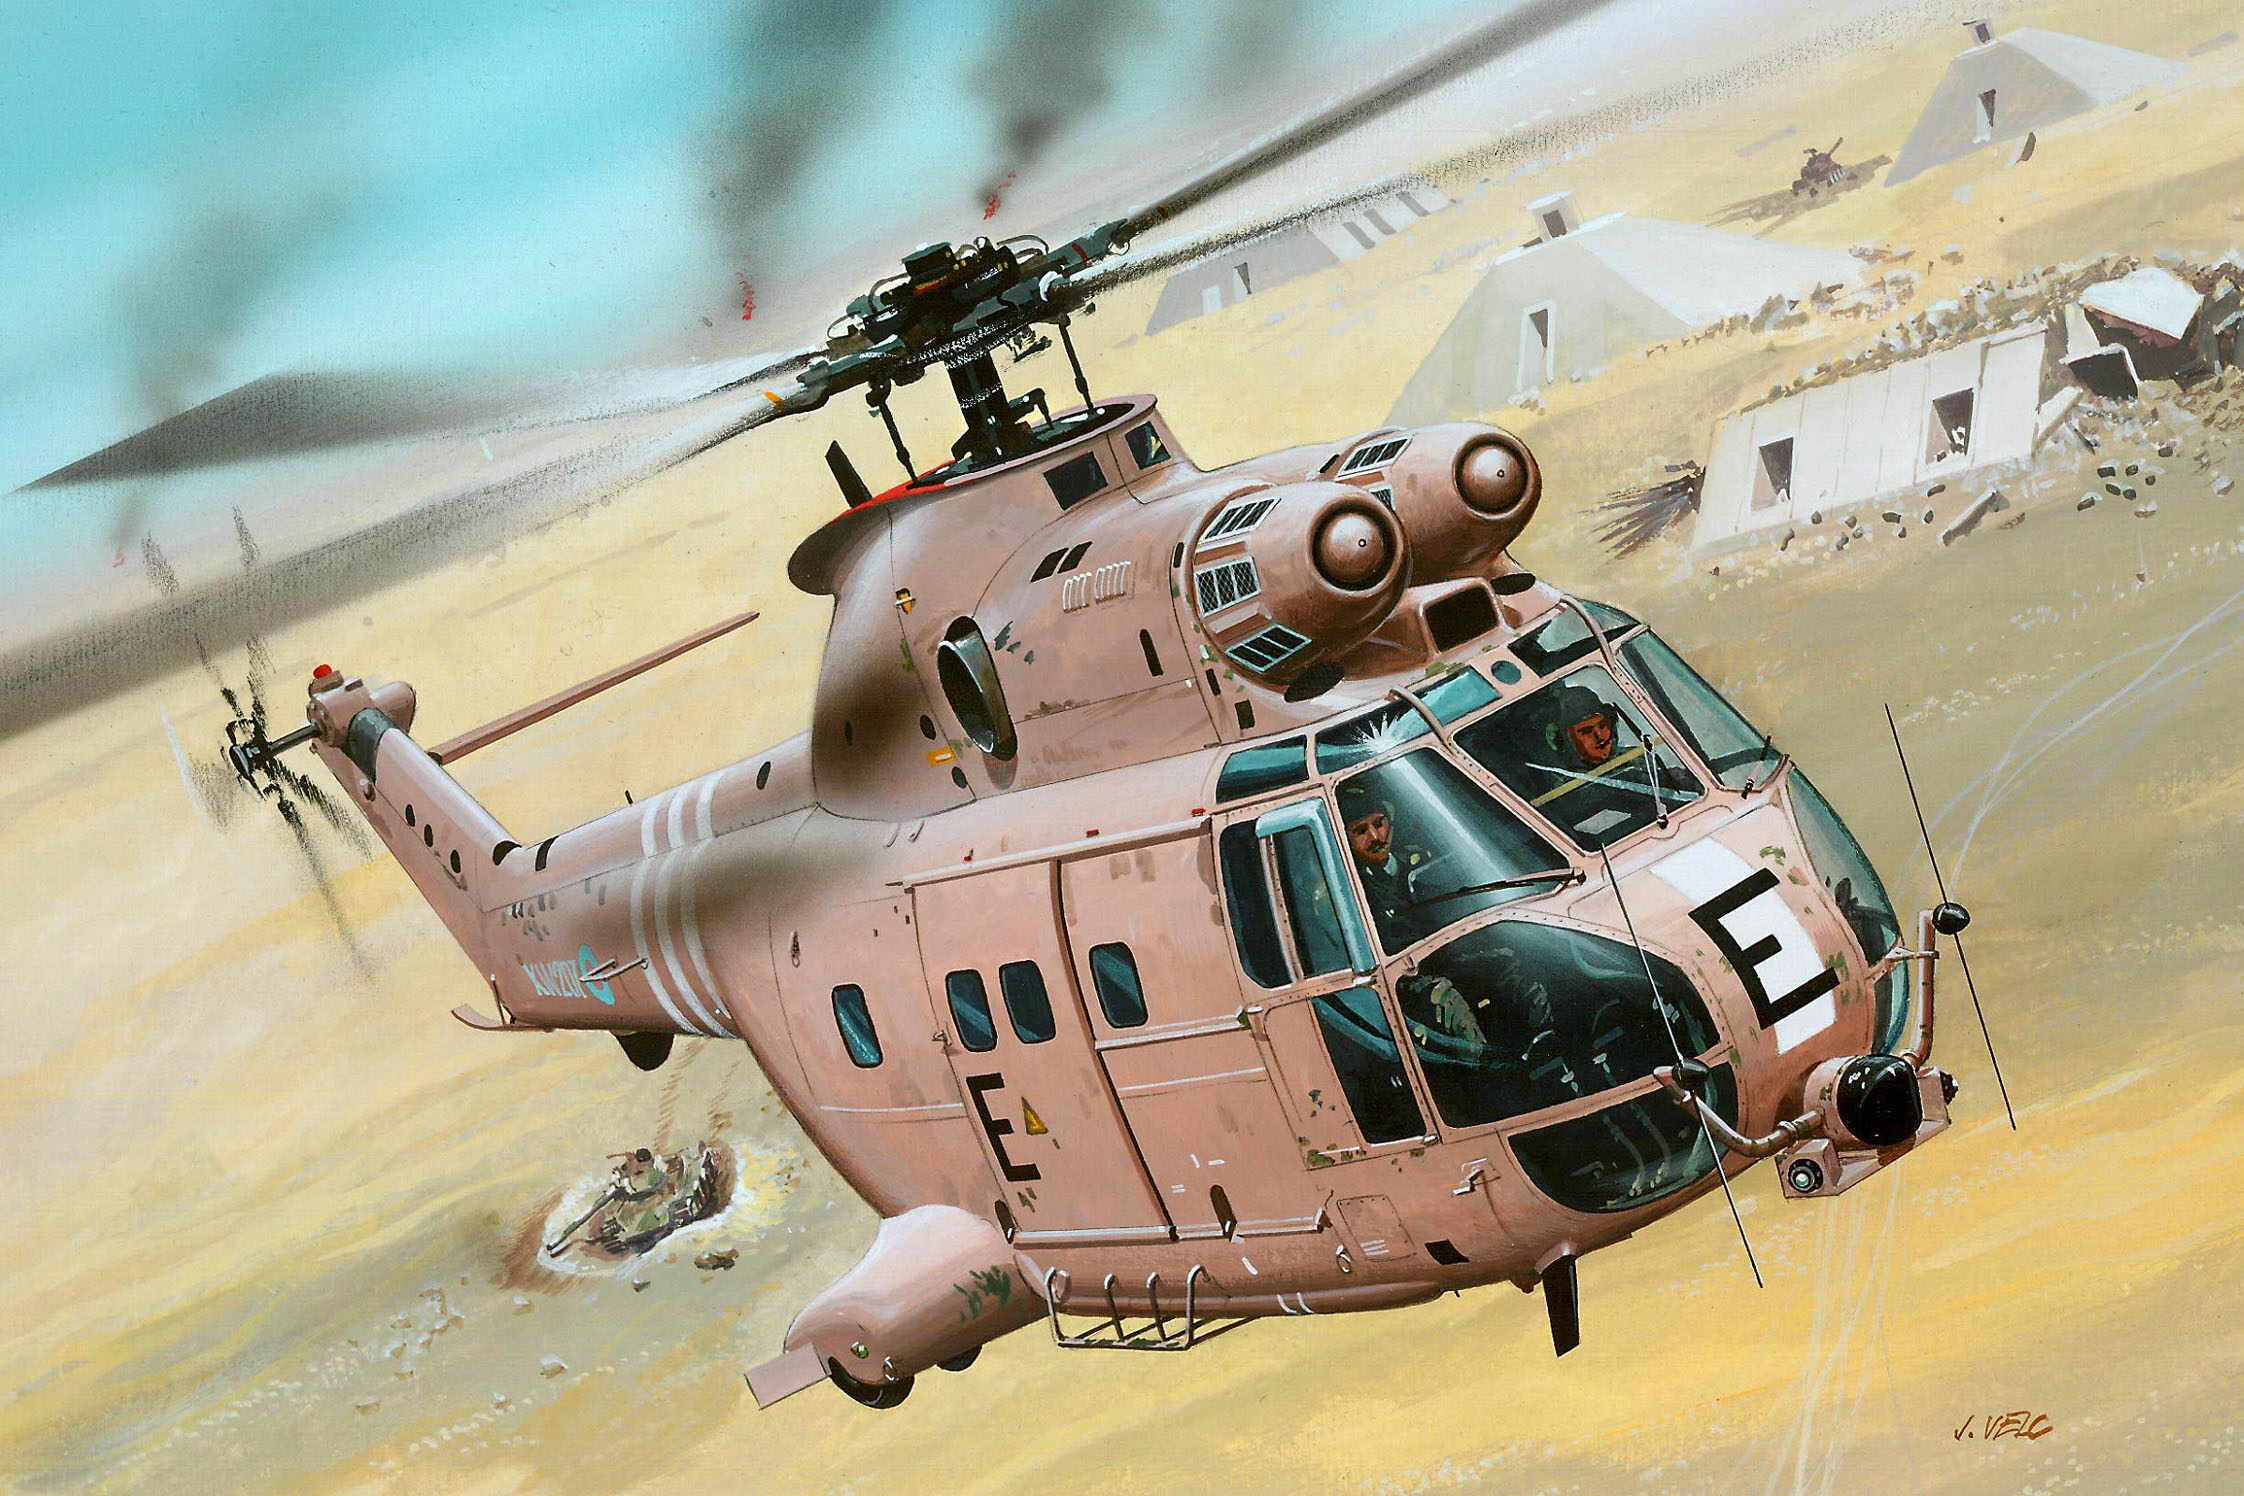 General 2244x1496 aircraft flying military army military vehicle artwork signature smoke pilot desert sky clouds Jaroslav Velc Boxart helicopters military aircraft Operation Desert Storm Royal Air Force Aérospatiale SA 330 Puma